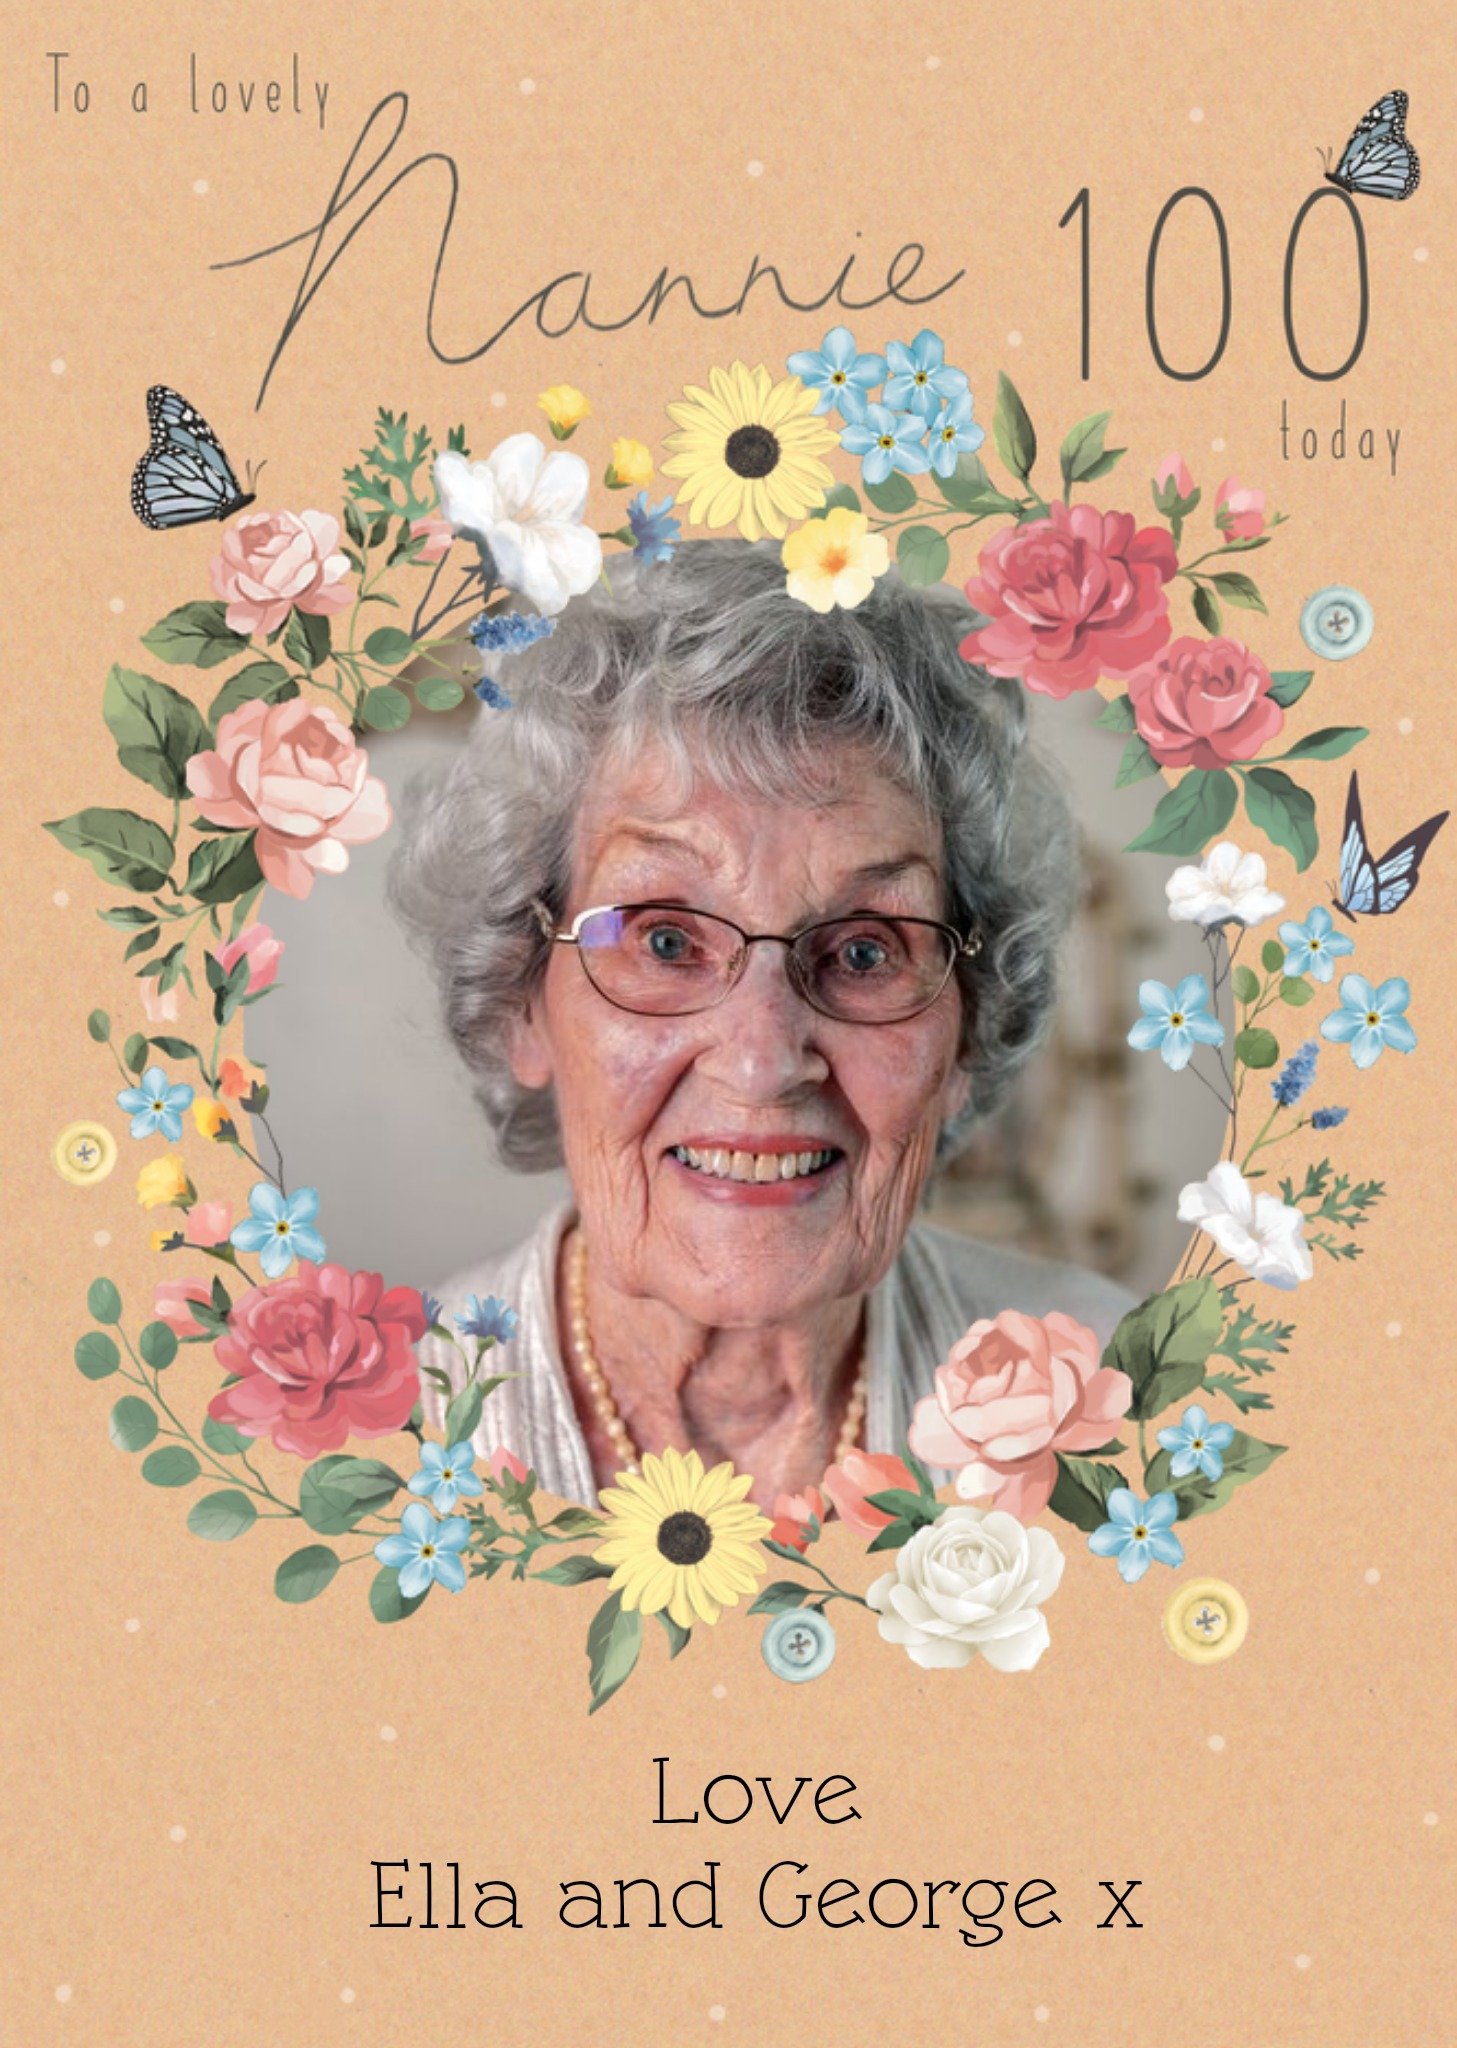 Moonpig Floral Wreath Design To A Lovely Nannie 100 Today Photo Upload Card Ecard